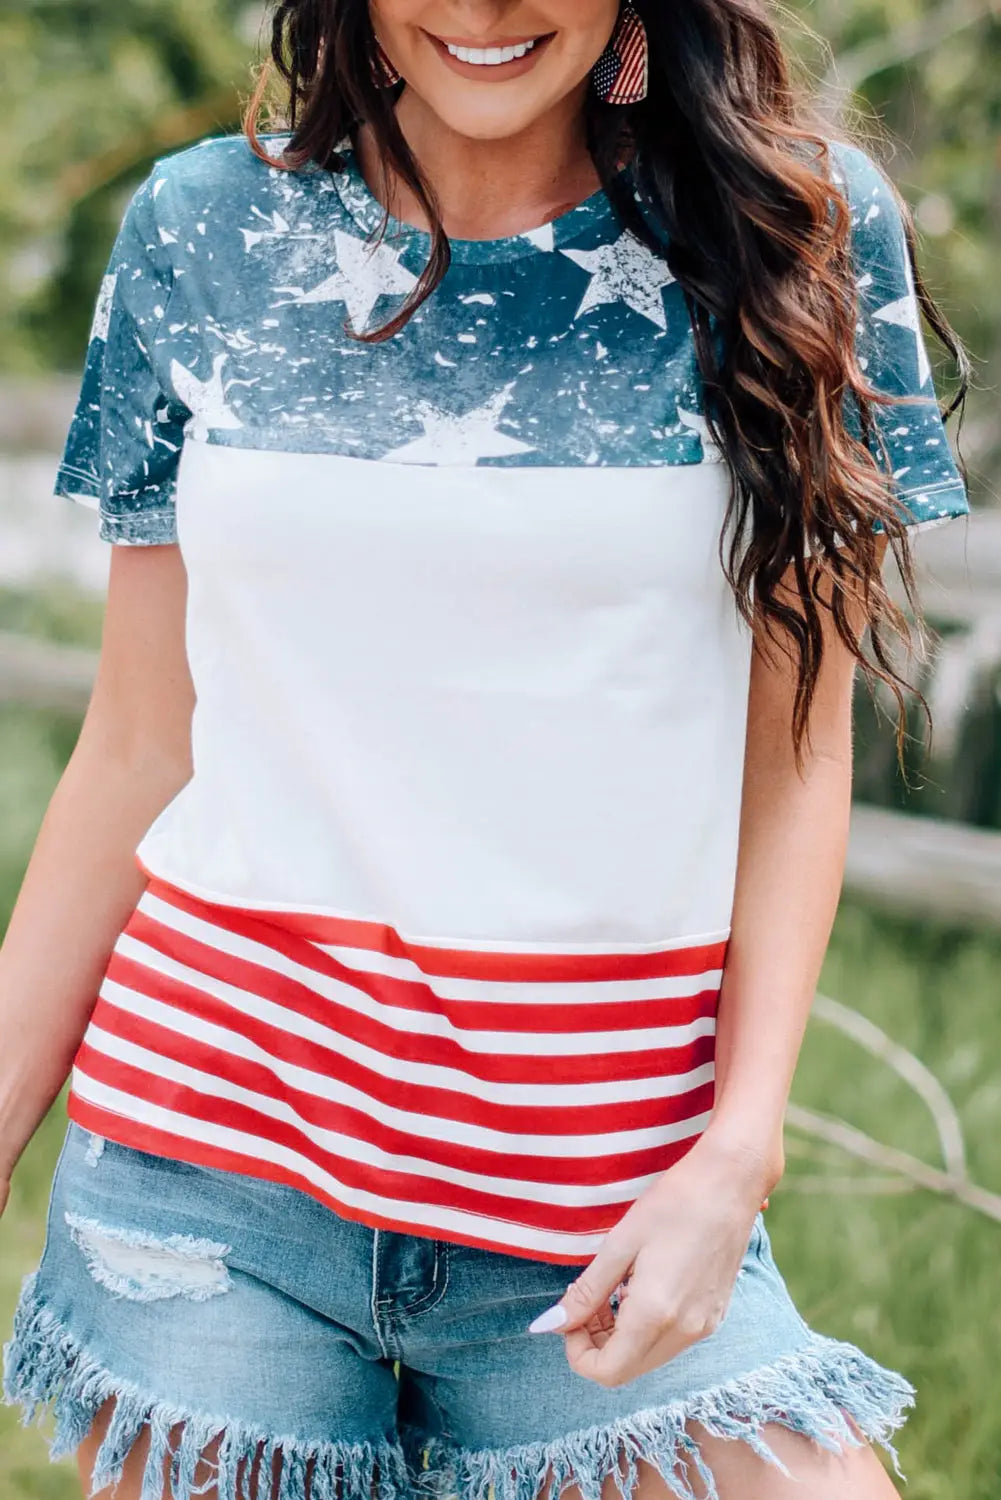 The us stars and stripes inspired top - multicolor / s /